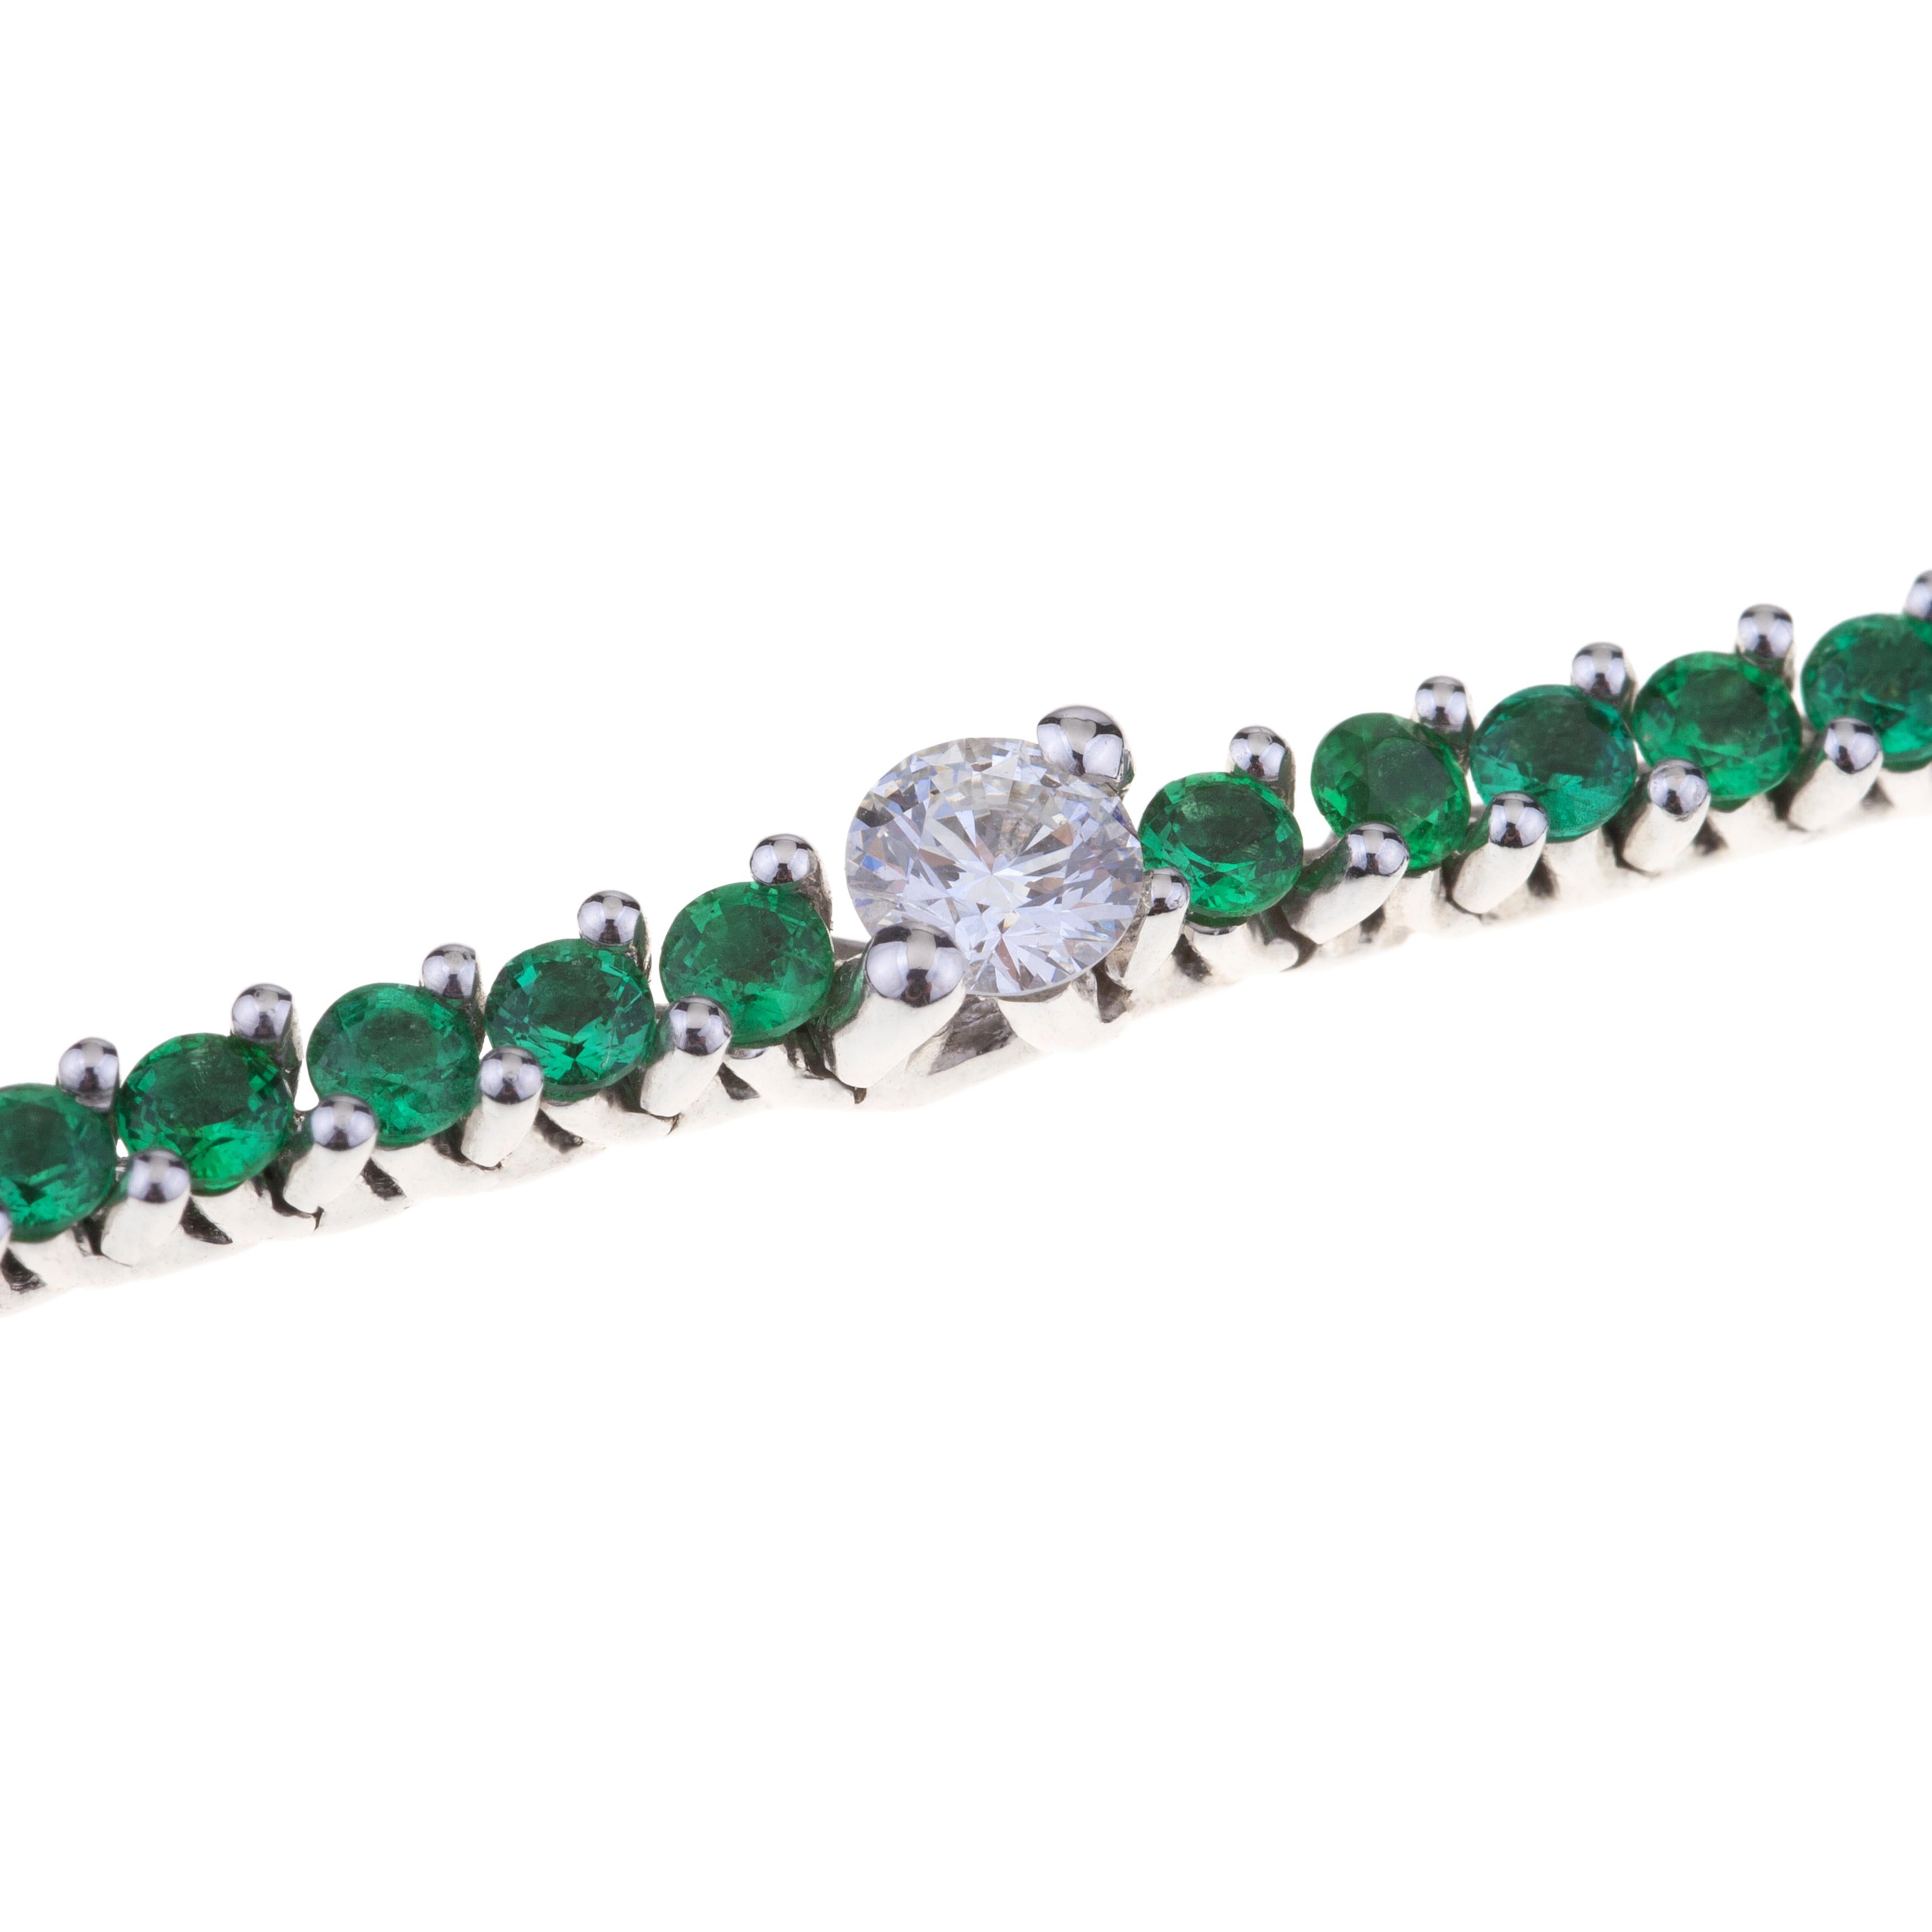 Bracelet Tennis with Emeralds and Diamonds White Gold.
Classic Tennis Bracelet with Emeralds ct. 2.85 and Seven Larger Diamonds ct. 1.57.
Lenght is cm. 18. 18kt gold grams are  13.8.
Designed in Italy.
Angeletti Boasts an Exceptional History Made of